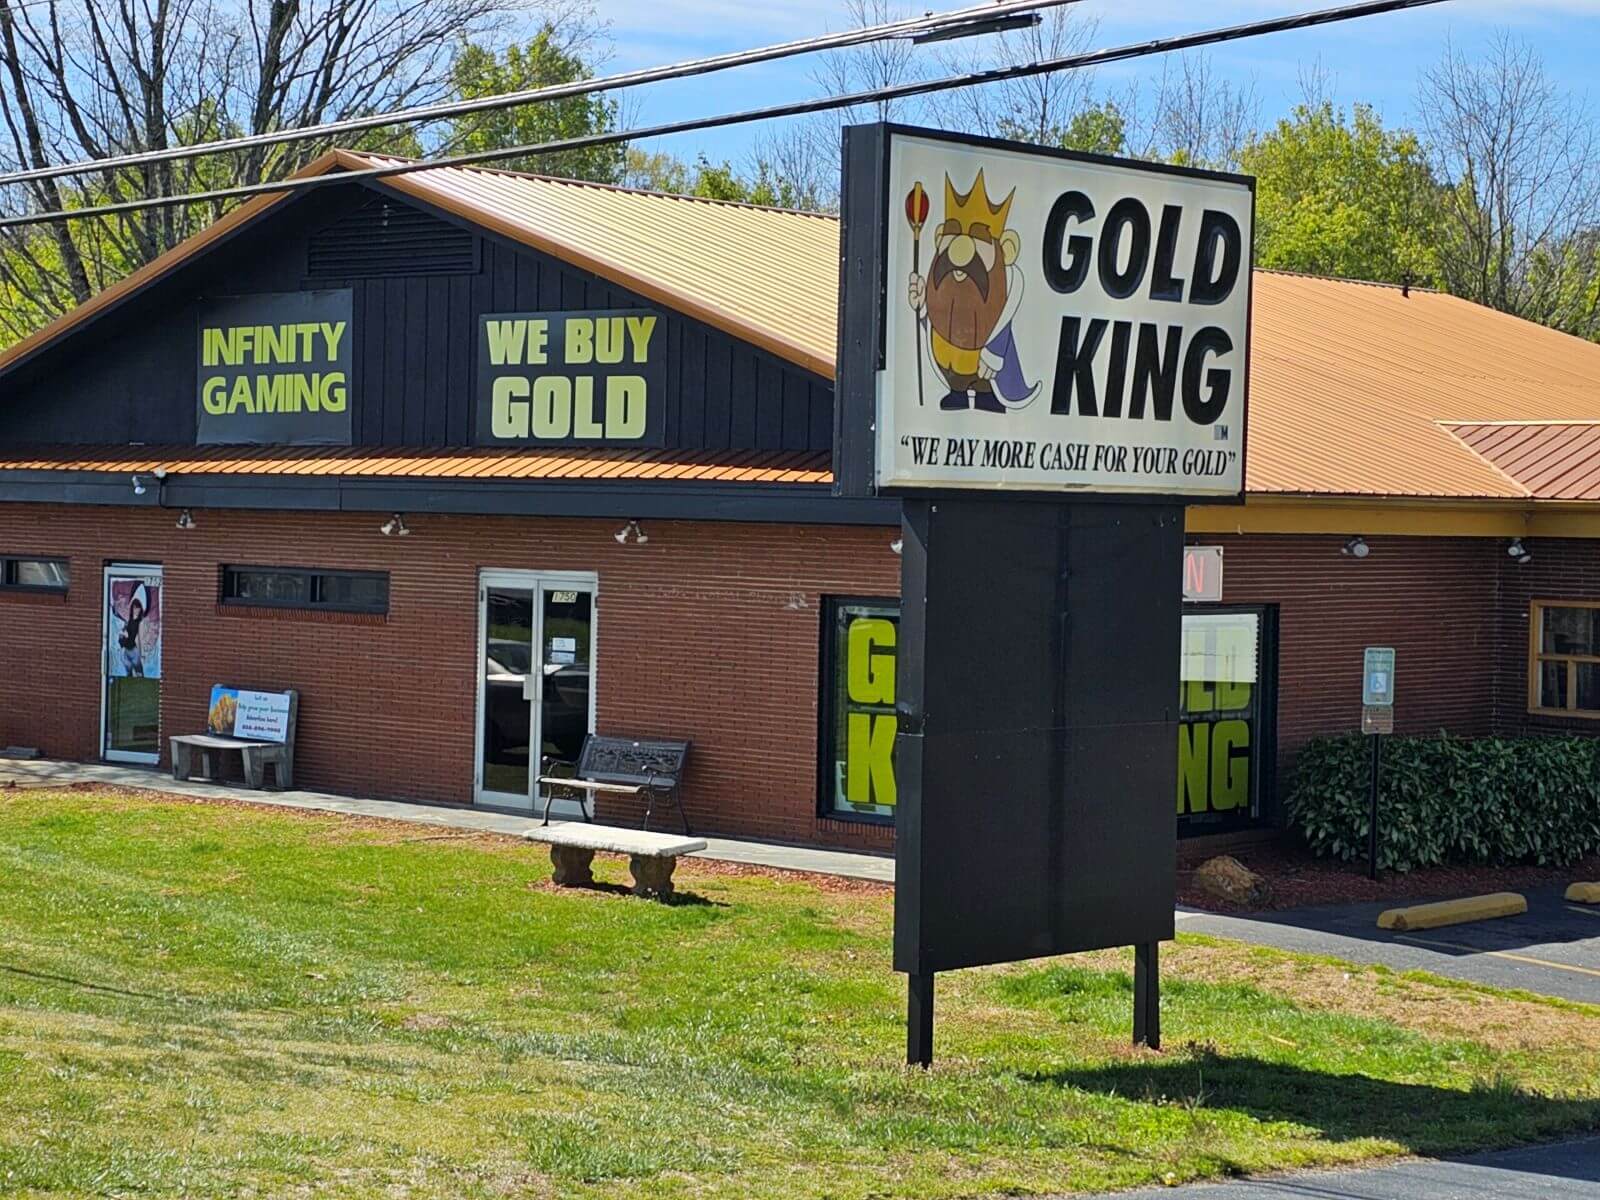 The Gold King Name Board and Store